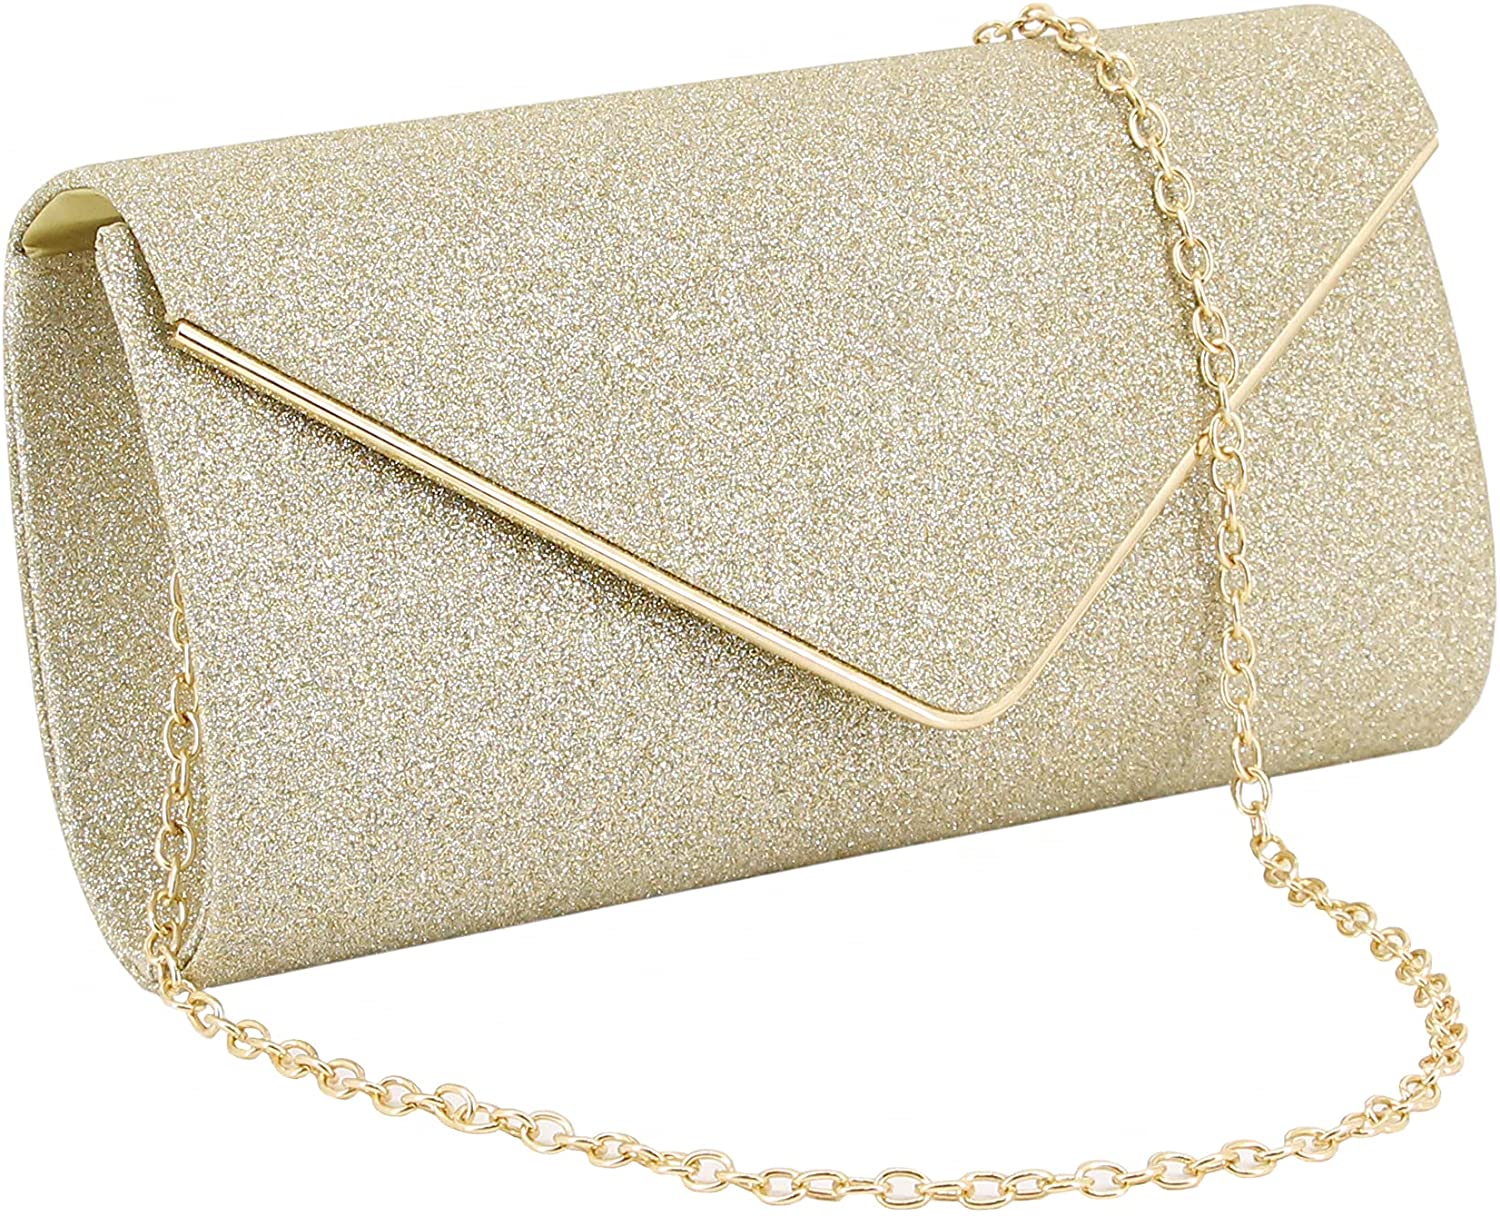 Naimo Flap Dazzling Clutch Bag Evening Bag With Detachable Chain 